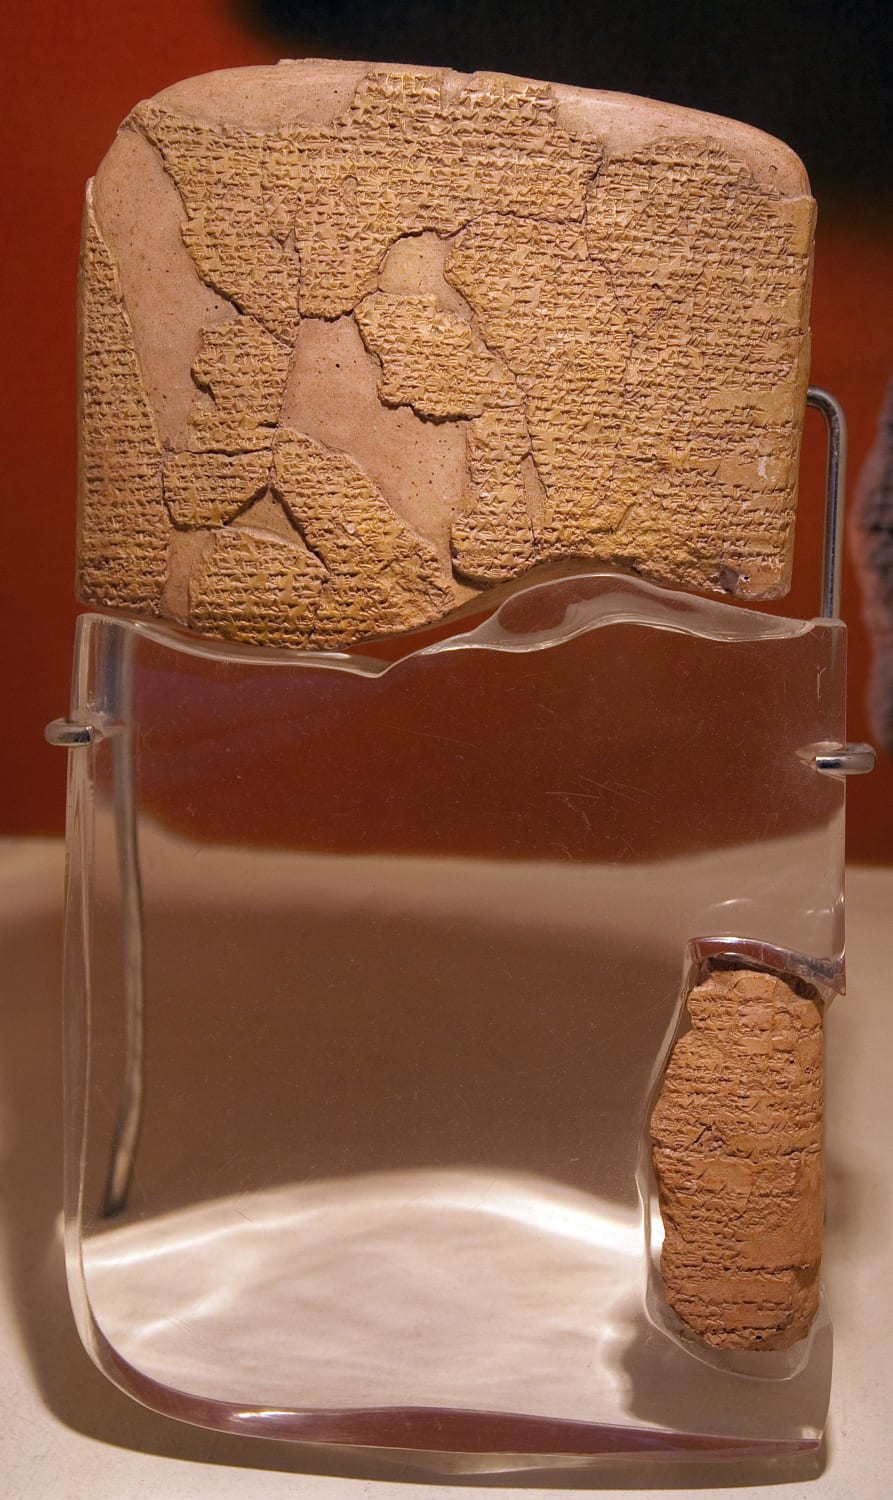 The Kadesh Peace Treaty, the oldest known peace treaty, signed between Ramesses II of Egypt and Hattusili III of the Hittite Empire in 1258 BCE.